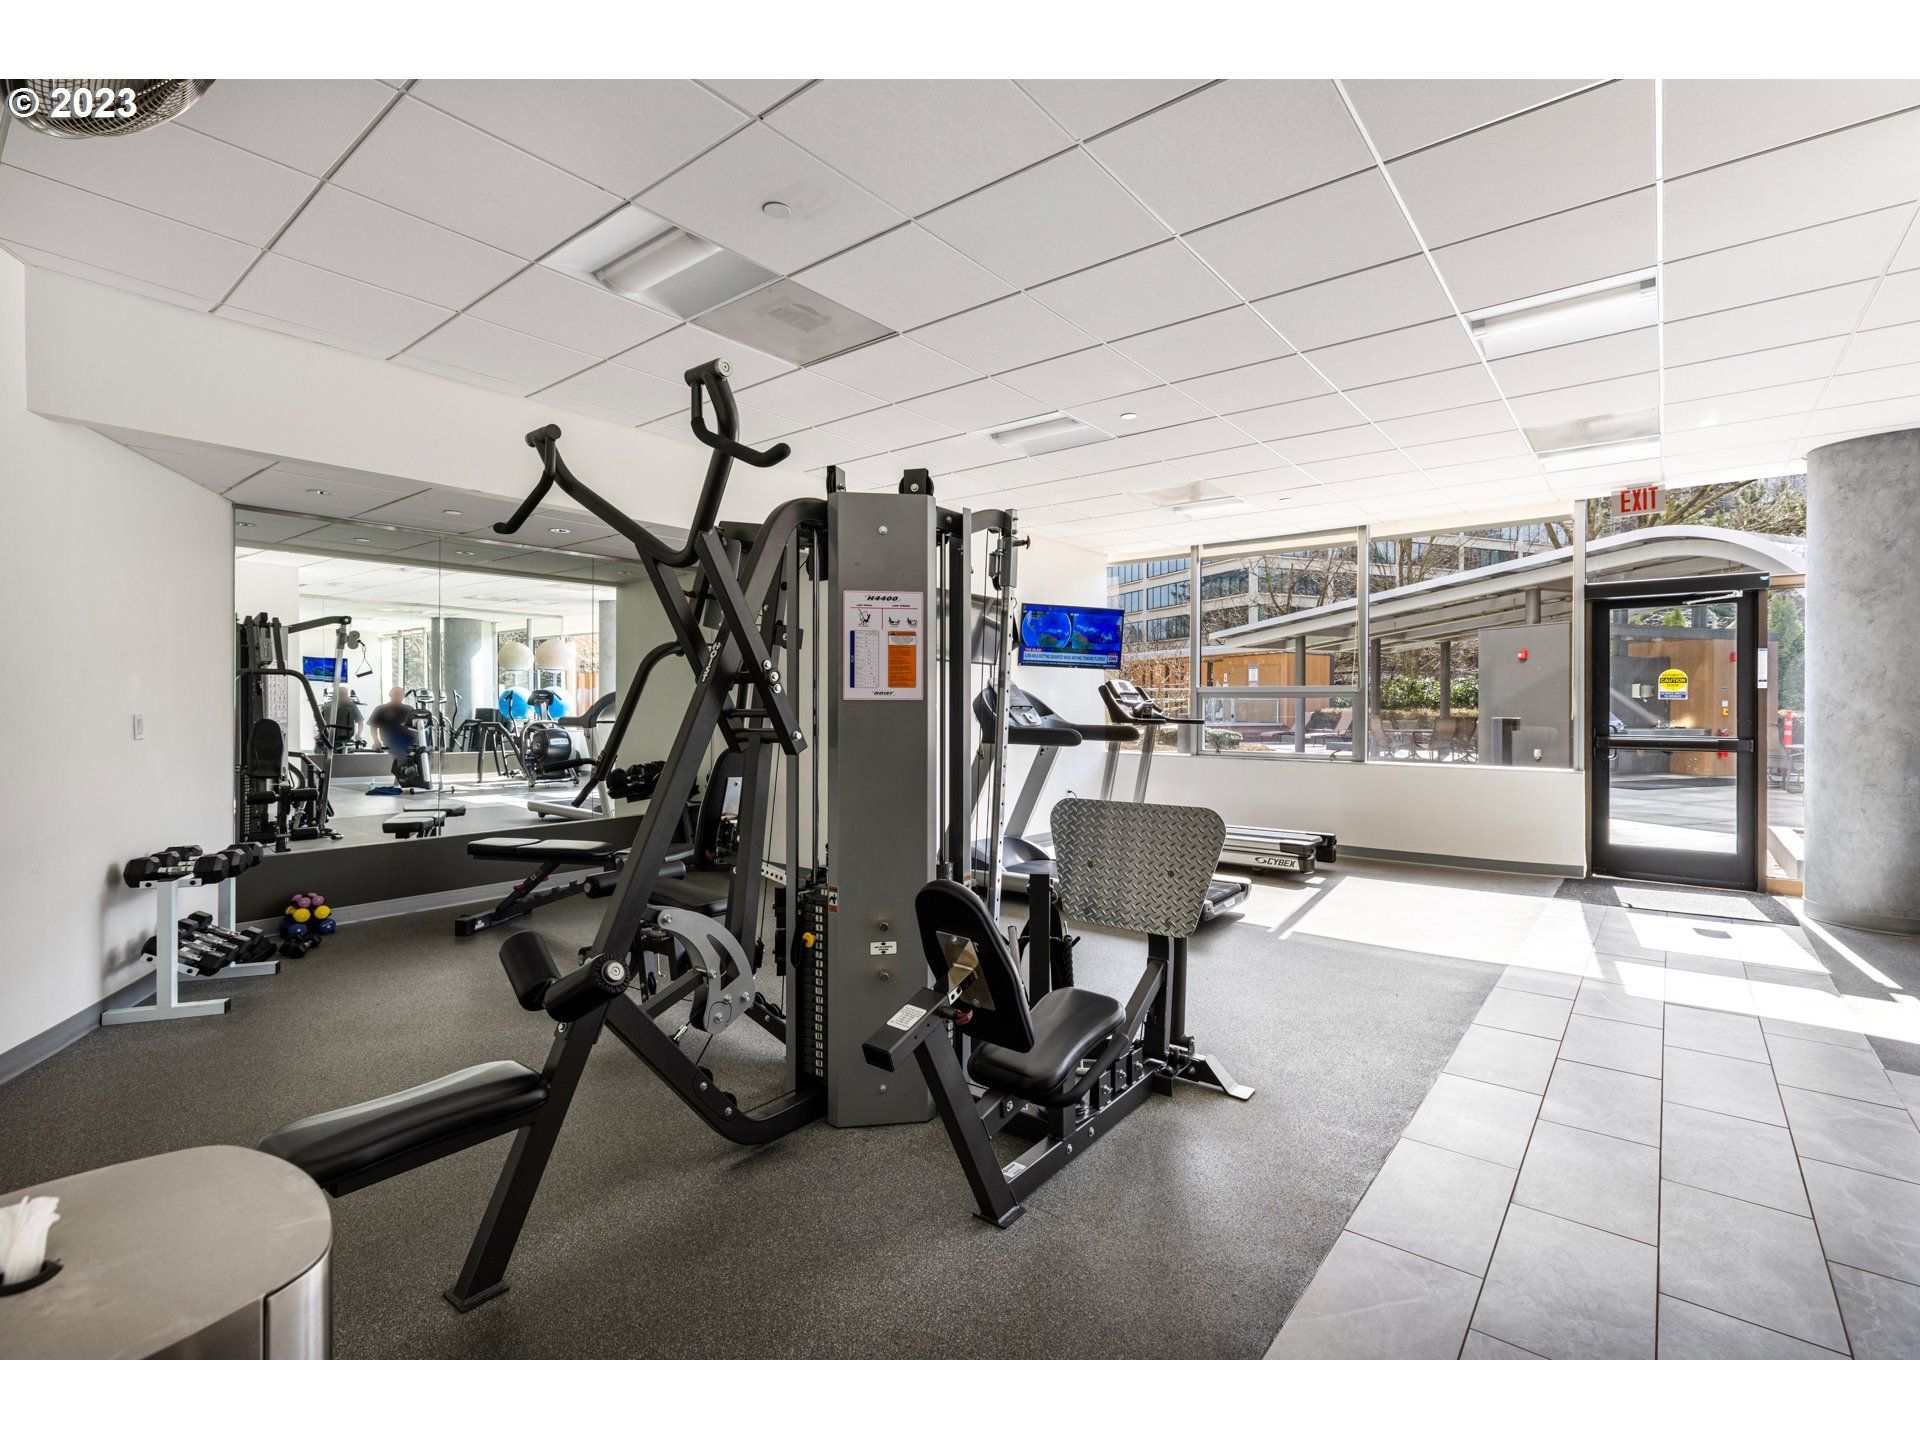 Fitness center in a high-rise